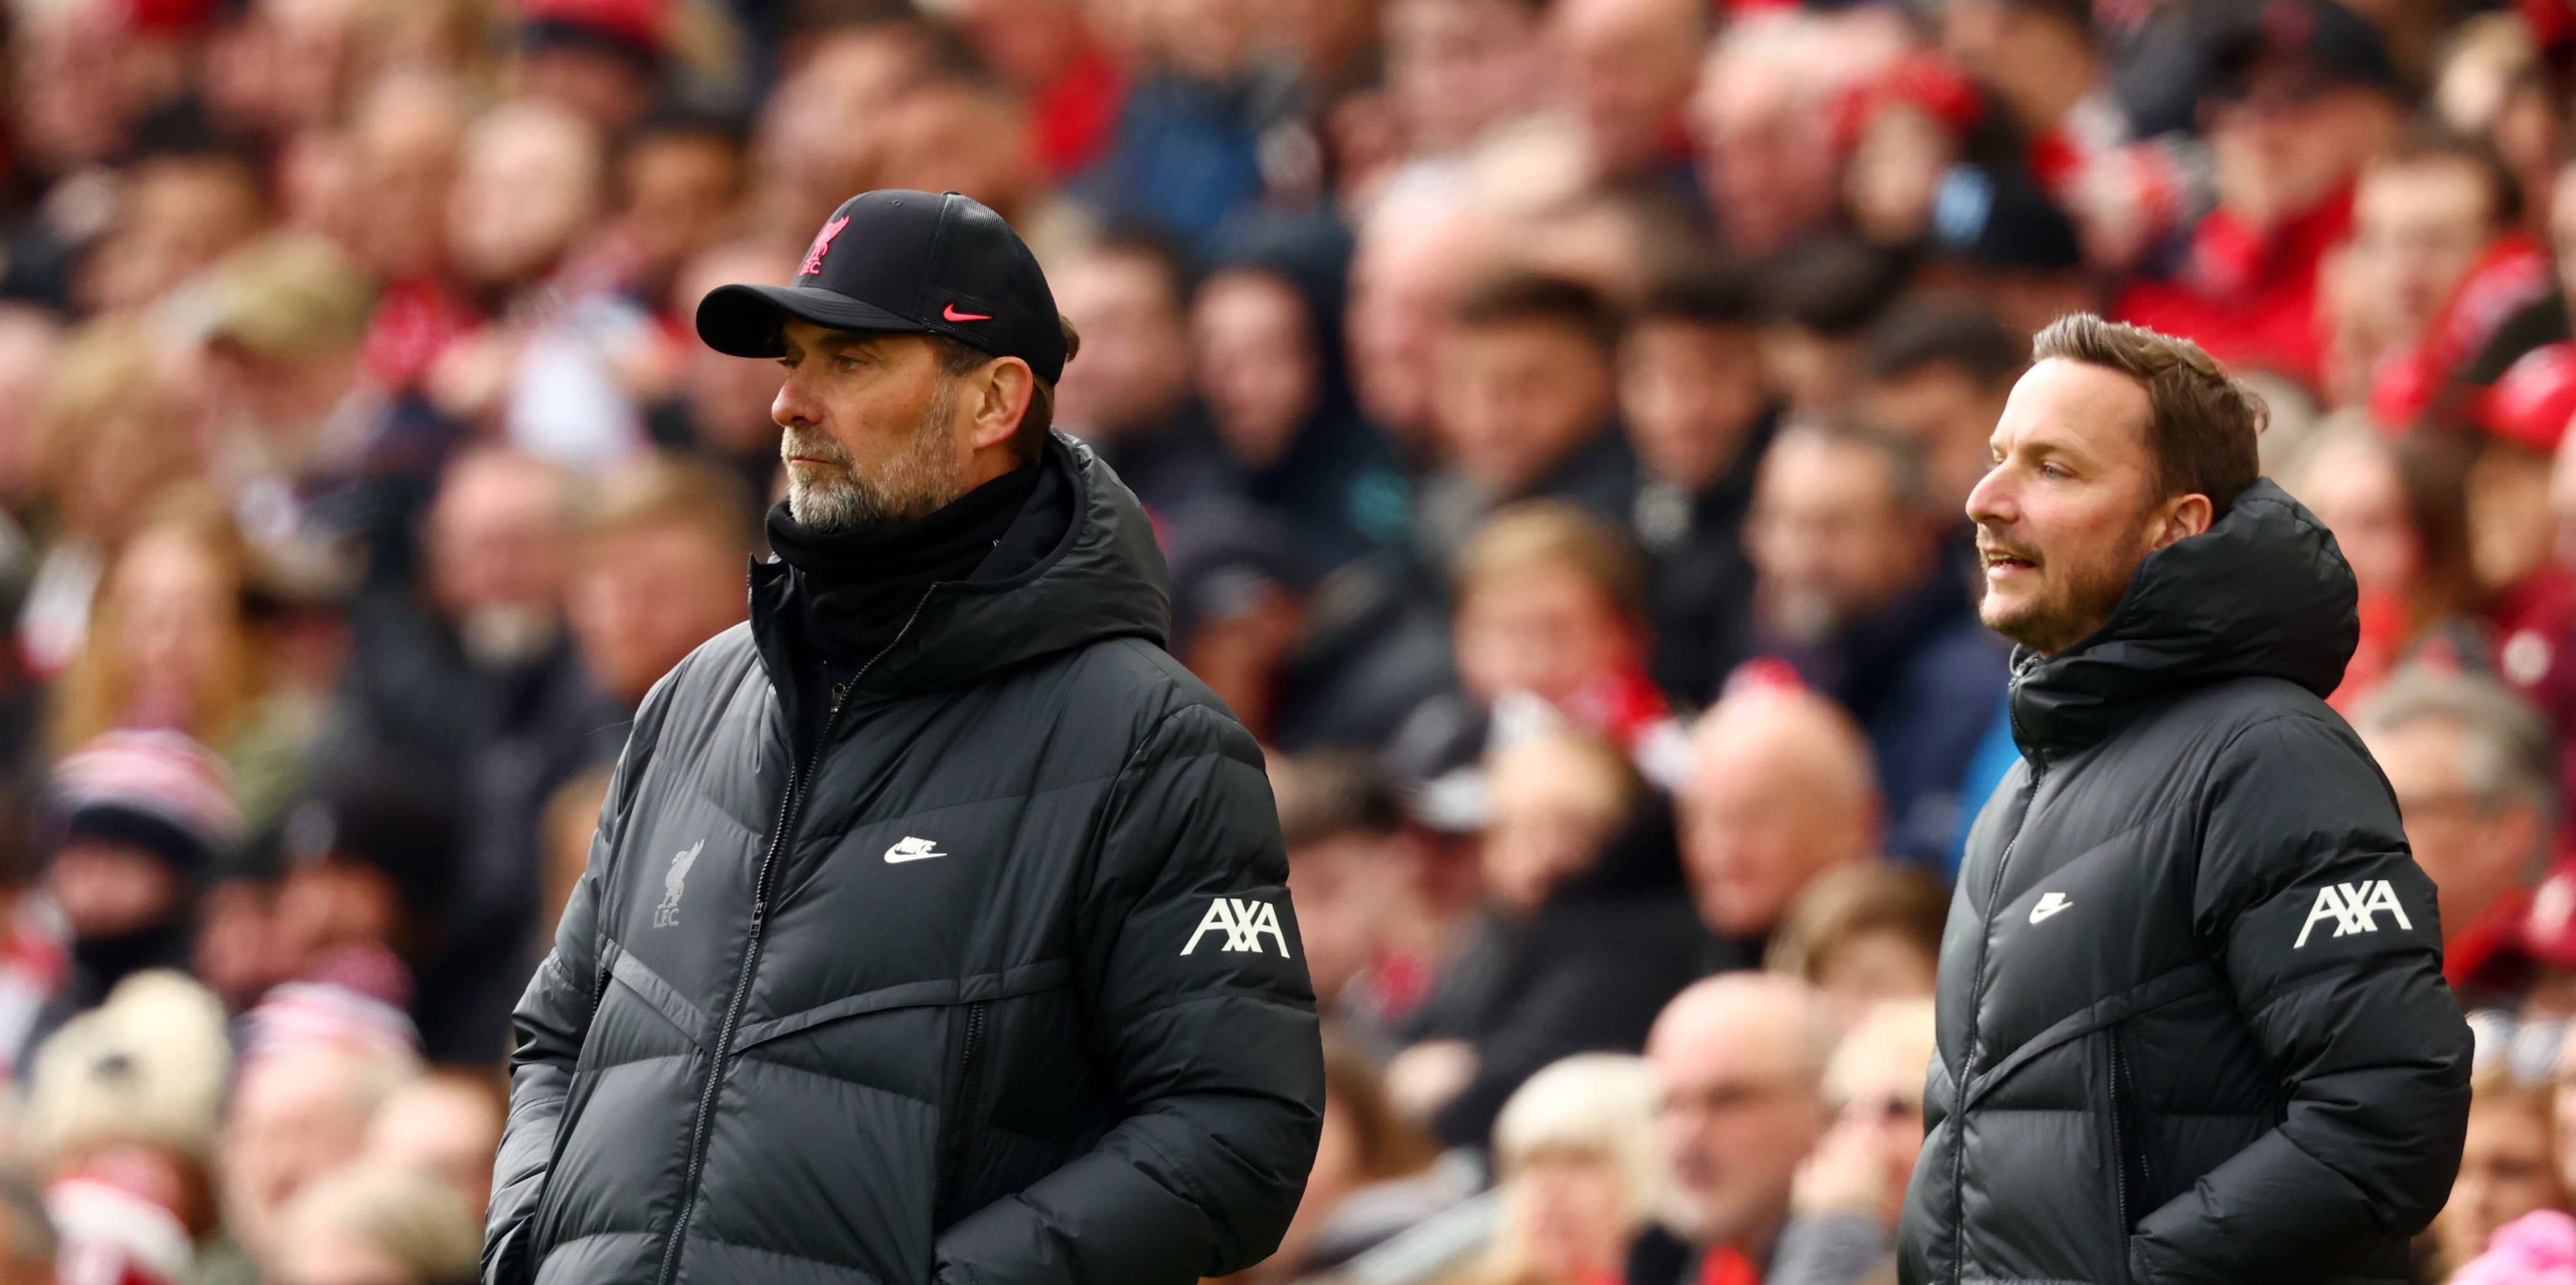 Jurgen Klopp insists he’s only focussed on his side’s transfer business this summer as Liverpool’s rivals continue to scramble for signings